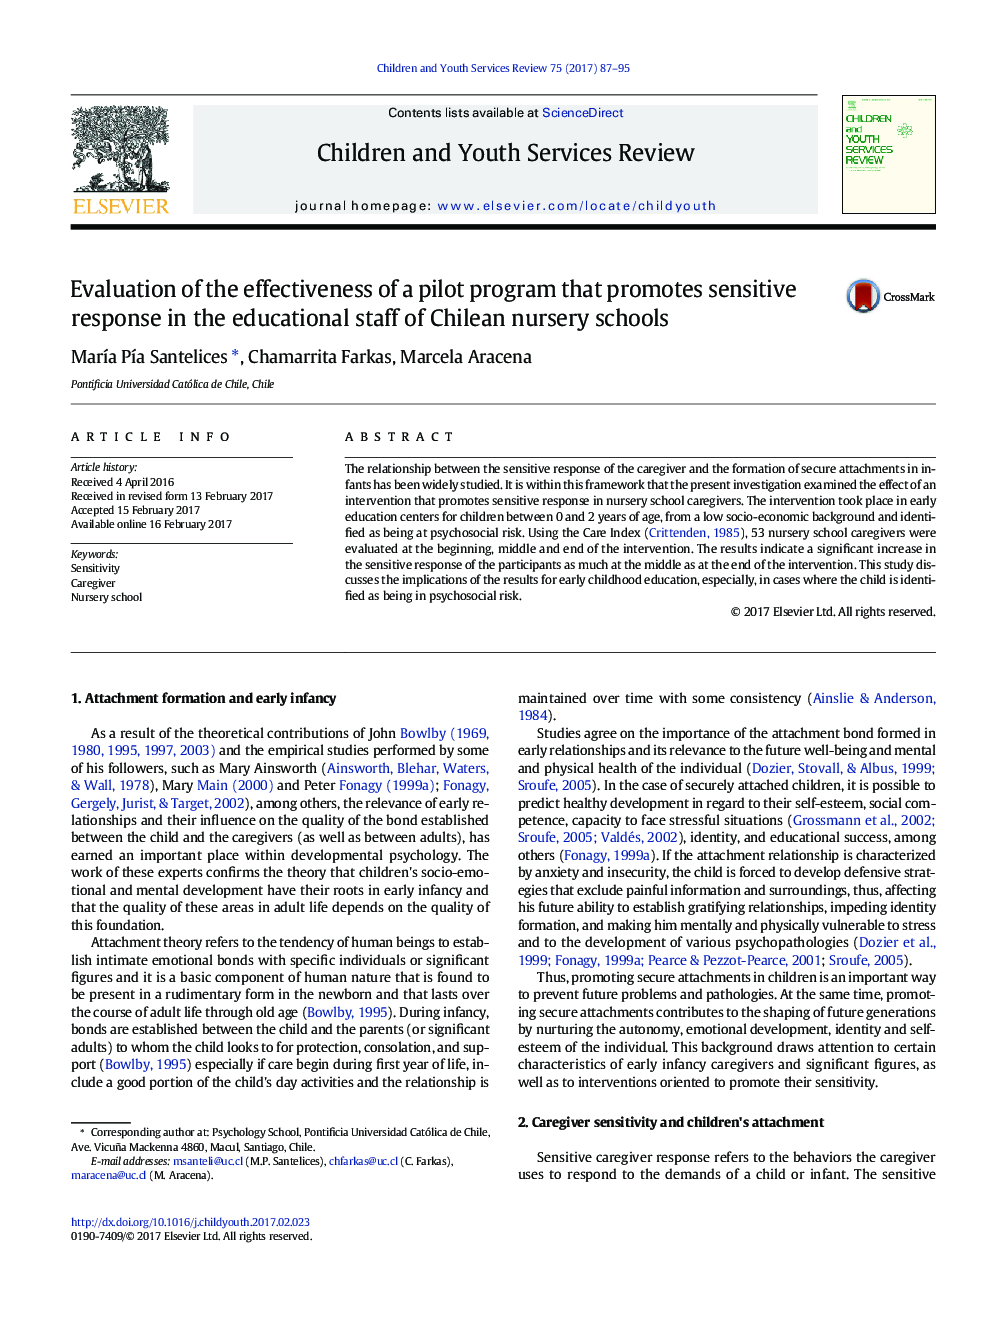 Evaluation of the effectiveness of a pilot program that promotes sensitive response in the educational staff of Chilean nursery schools